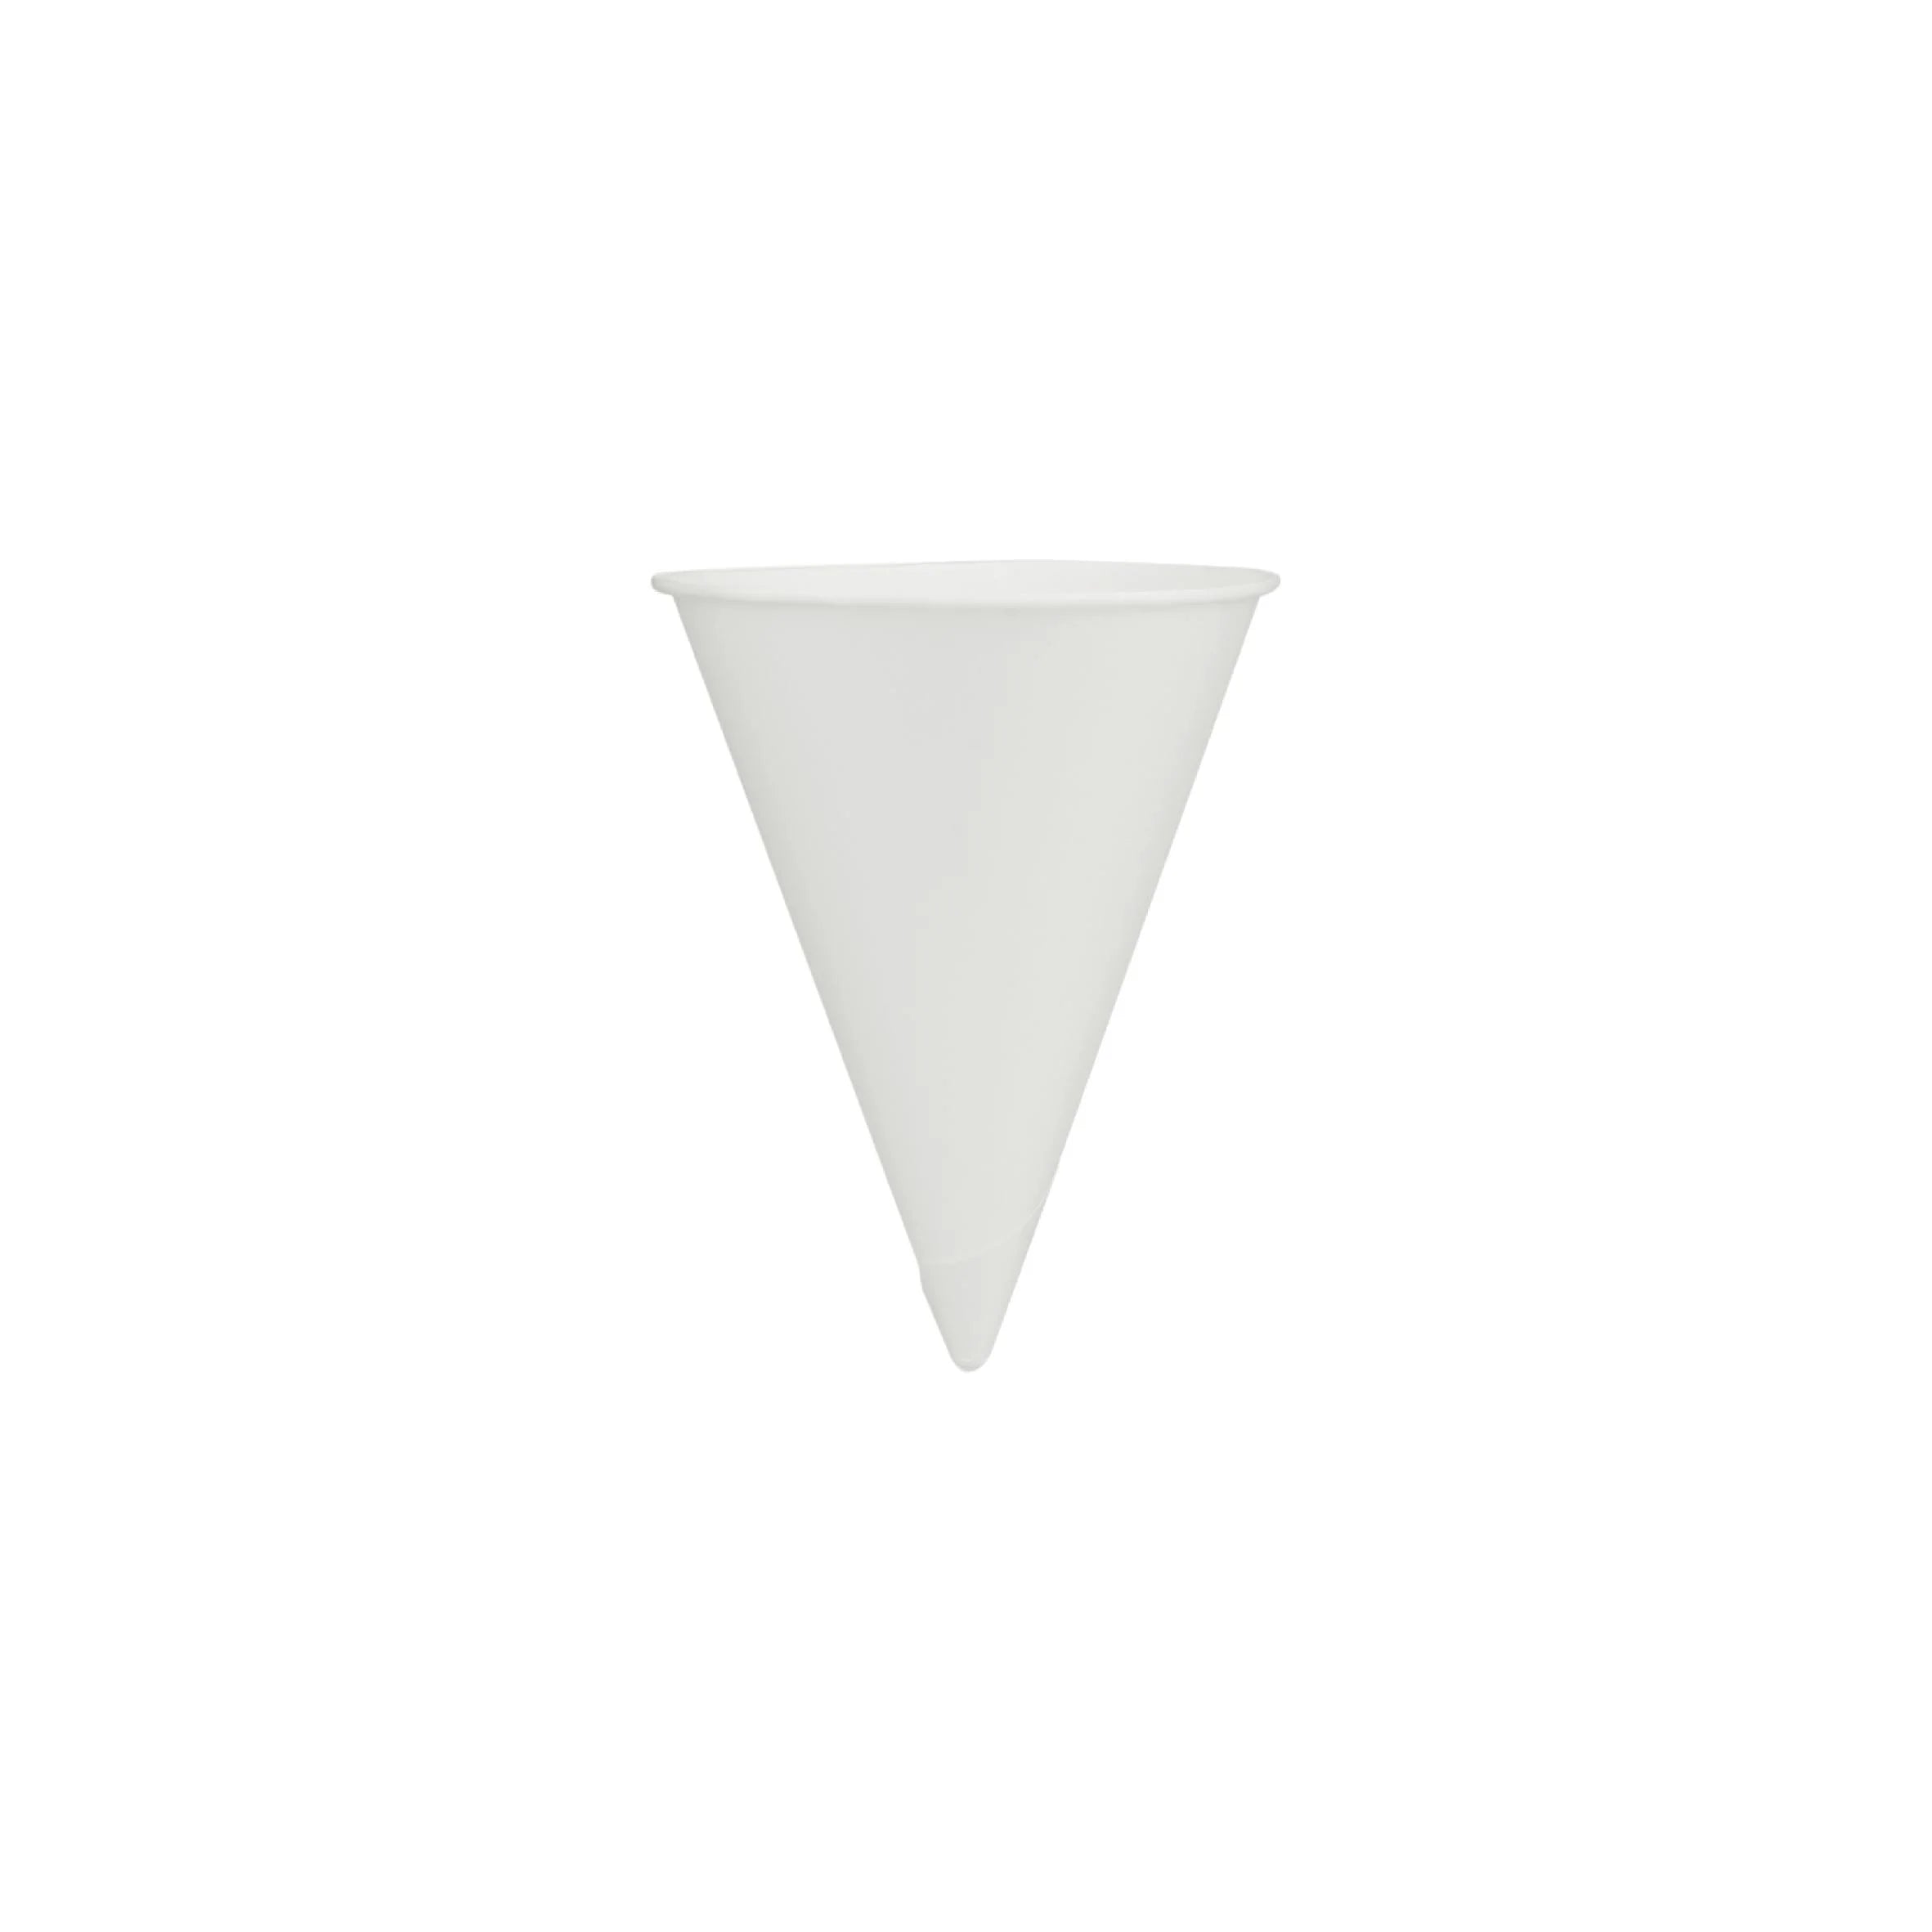 5000 Pieces White Paper Food Service Cone Cold Water Cup 4.5 Oz